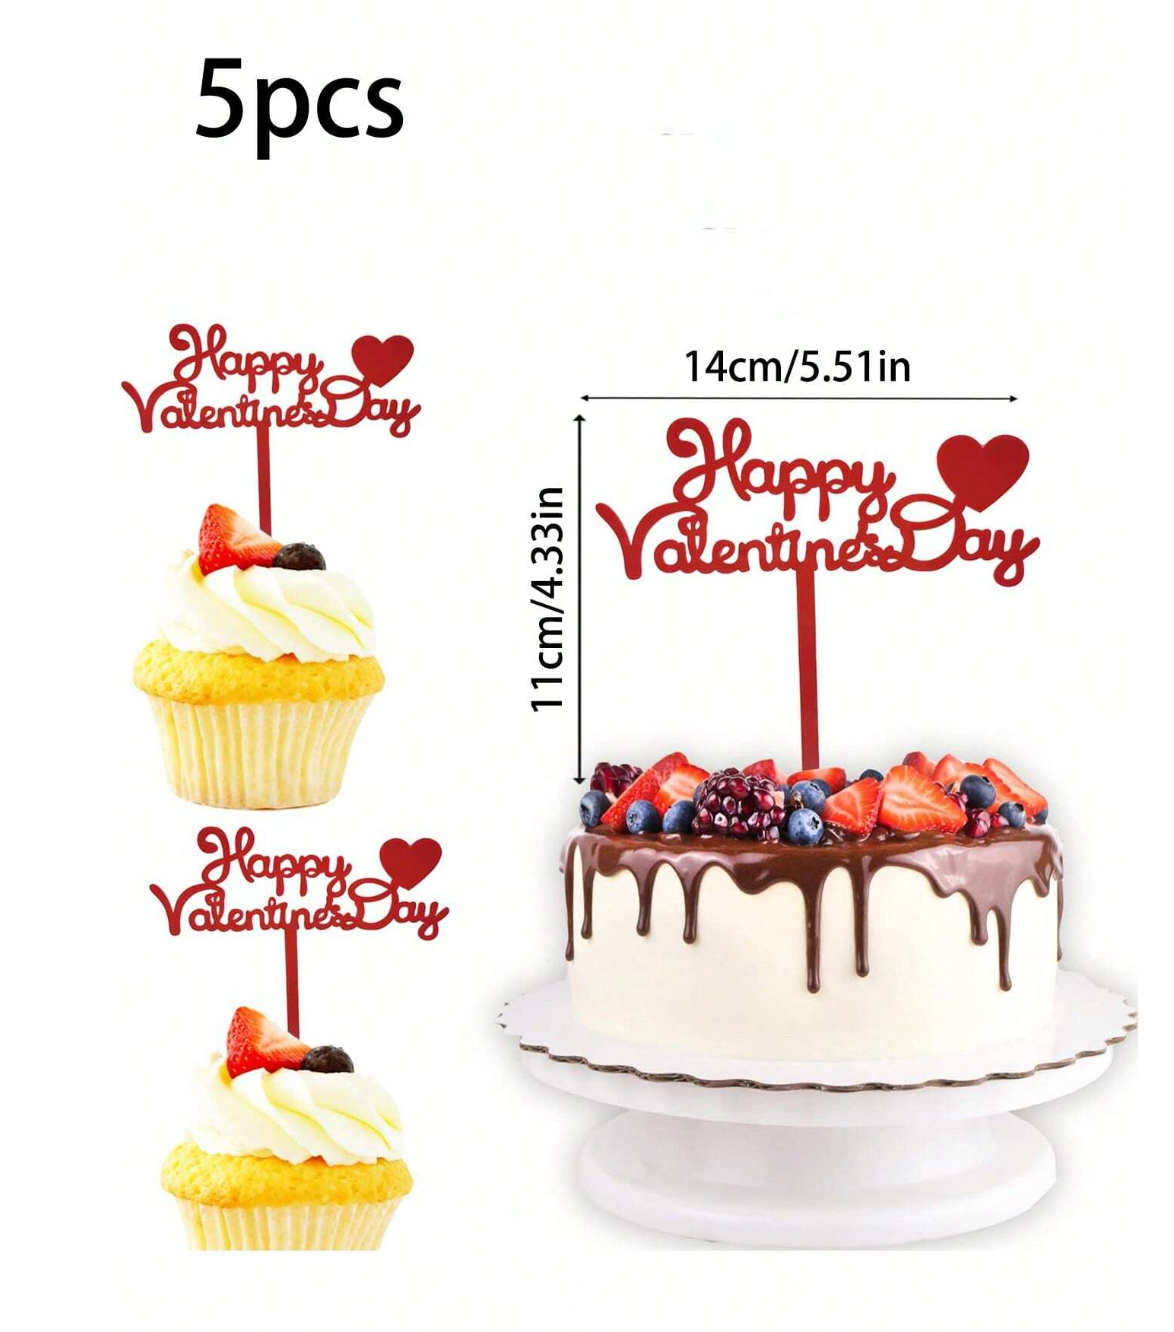 Love on Top: 5-Piece Acrylic Delight for Valentine's Day Cakes - Heartfelt Cake Toppers for a Sweet Celebration!